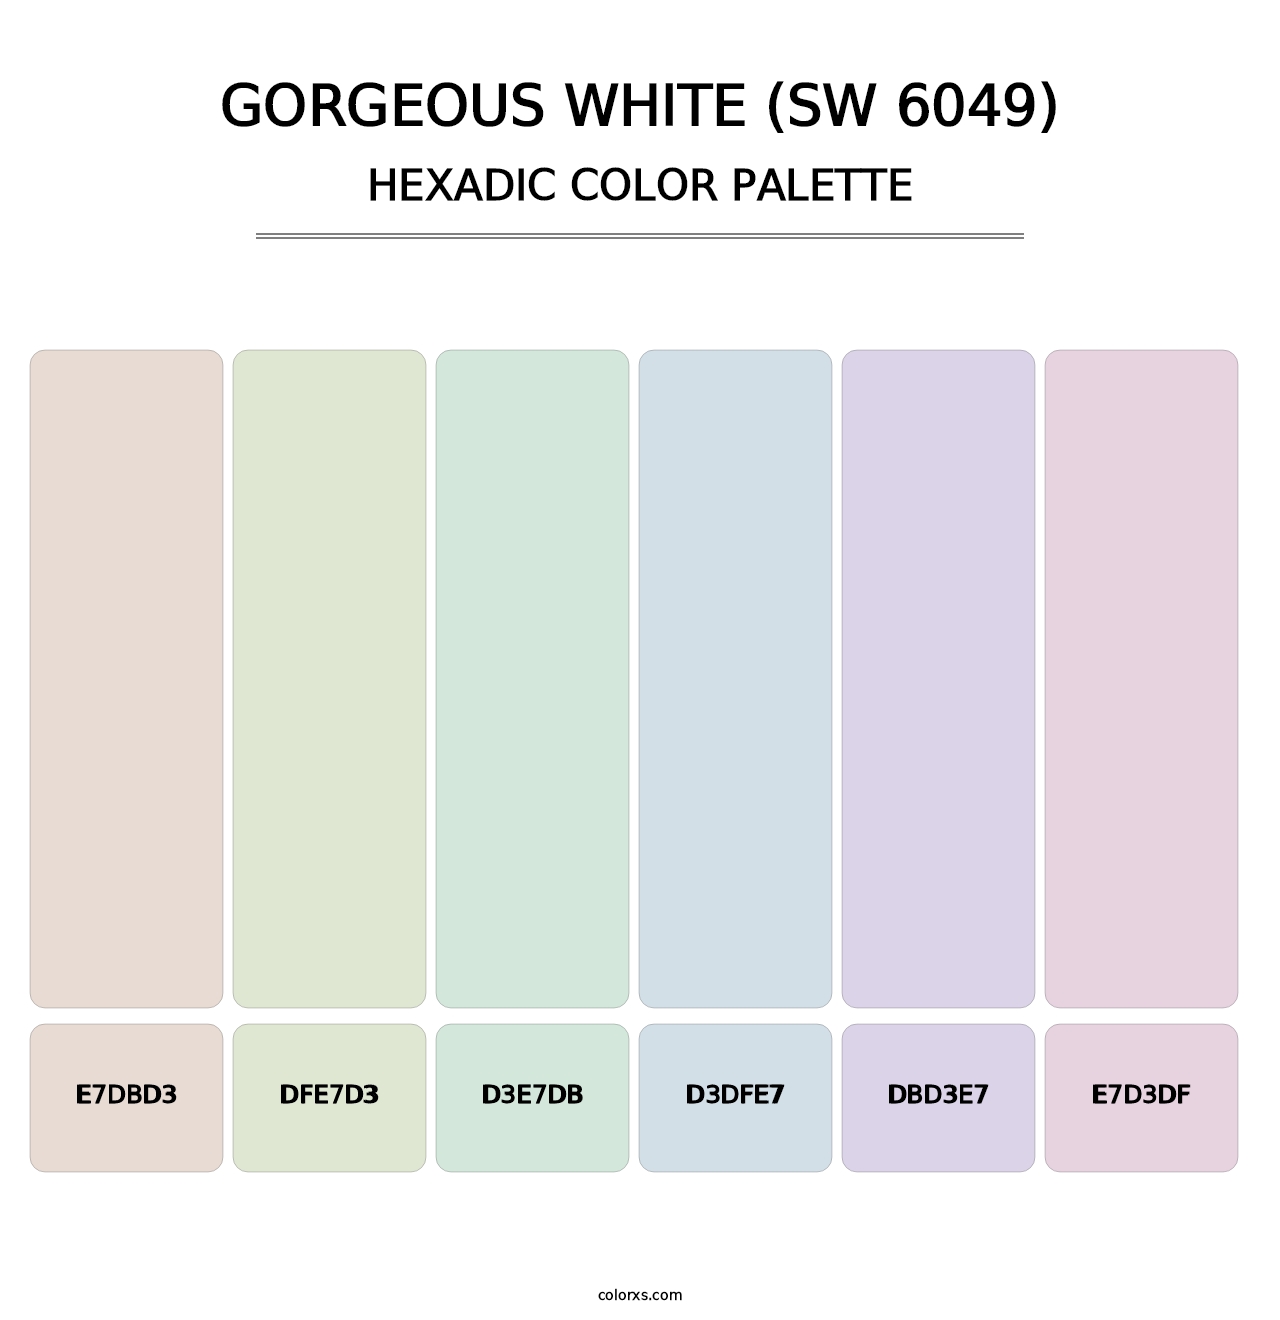 Gorgeous White (SW 6049) - Hexadic Color Palette